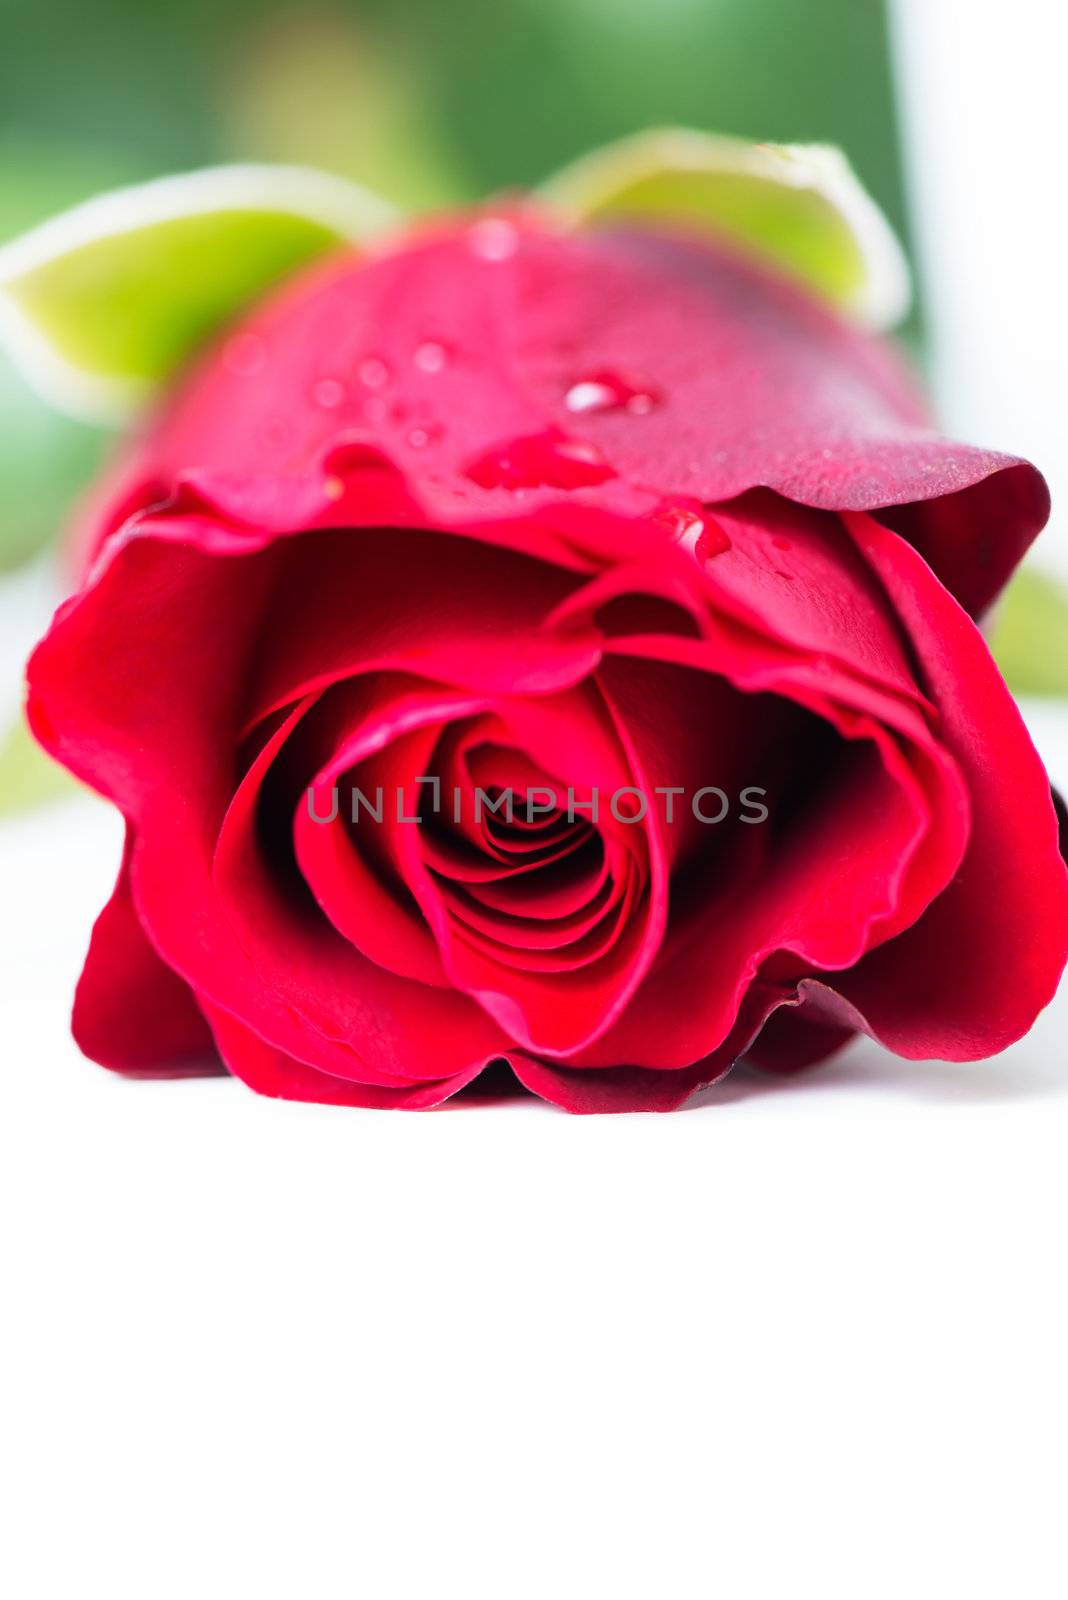 A single red rose in high key